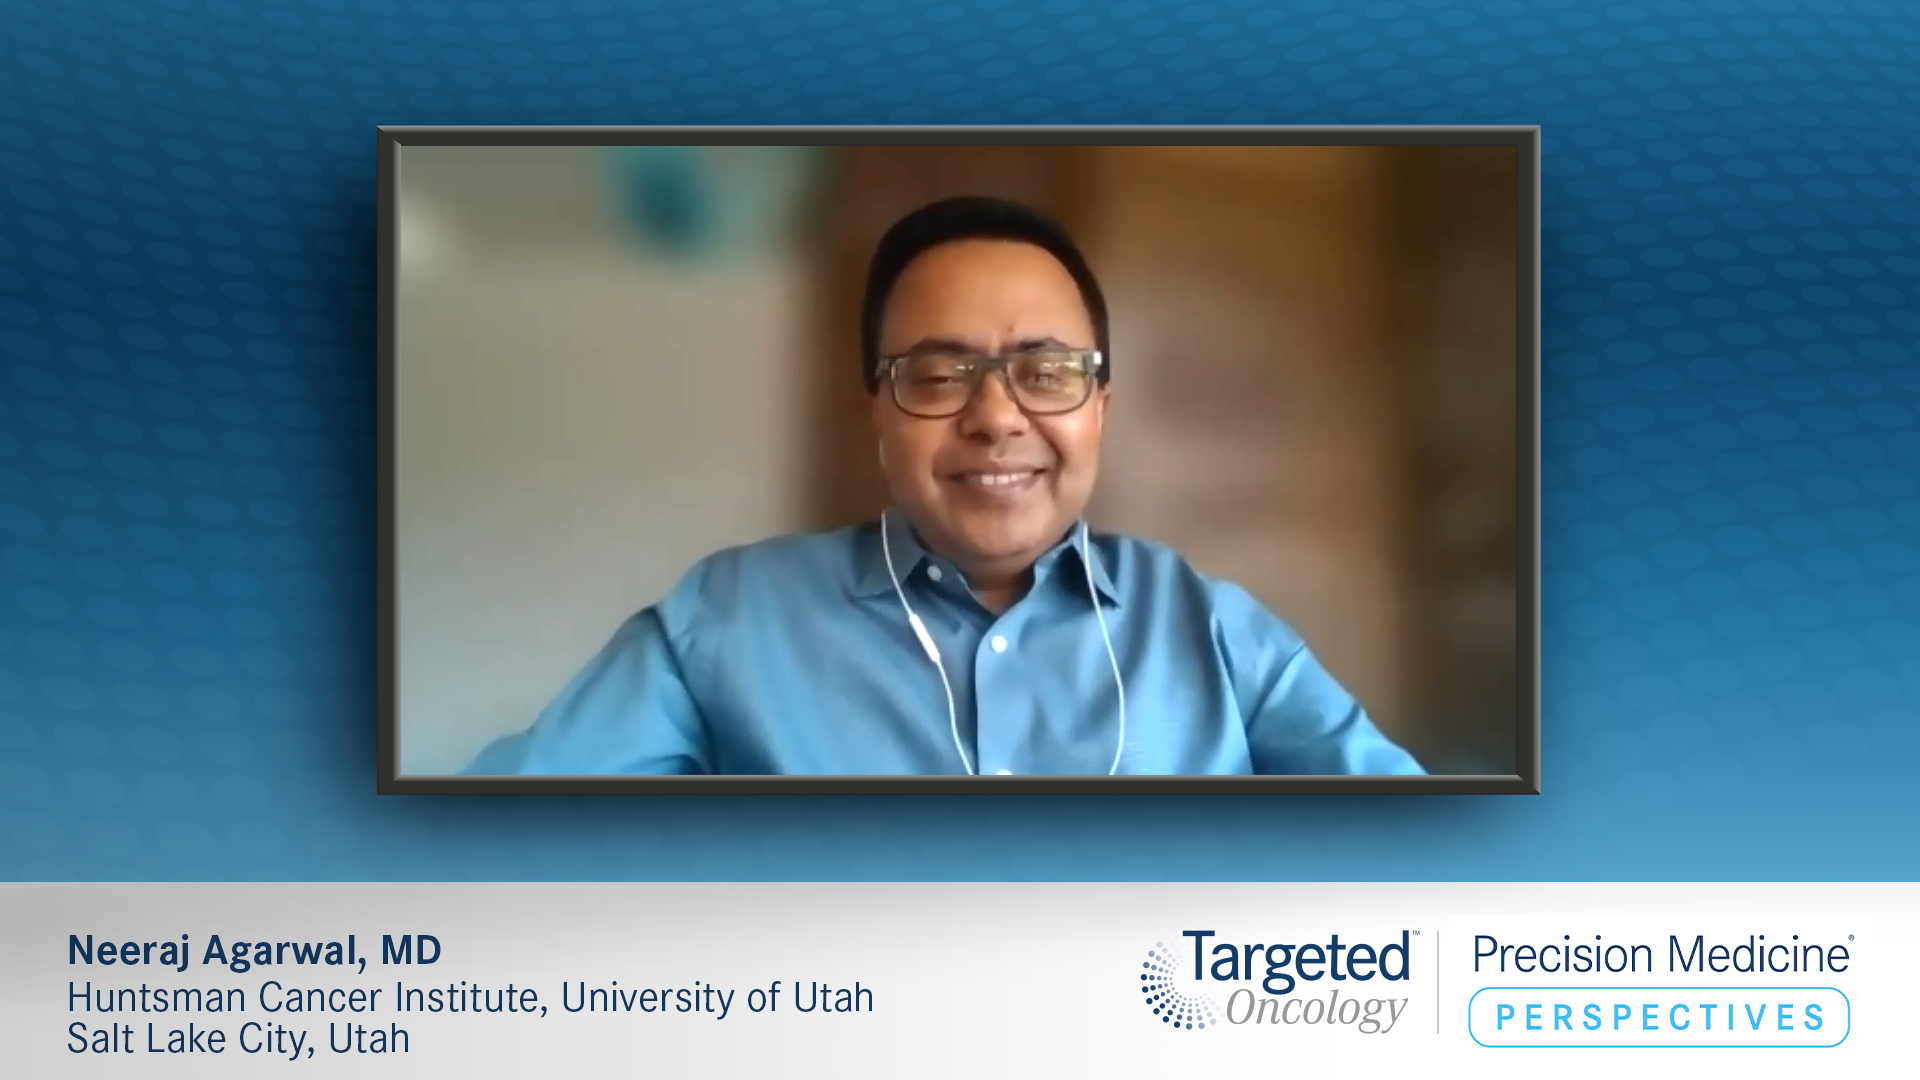 EP. 1A: The Role of Imaging and Genomic Testing in Prostate Cancer Treatment